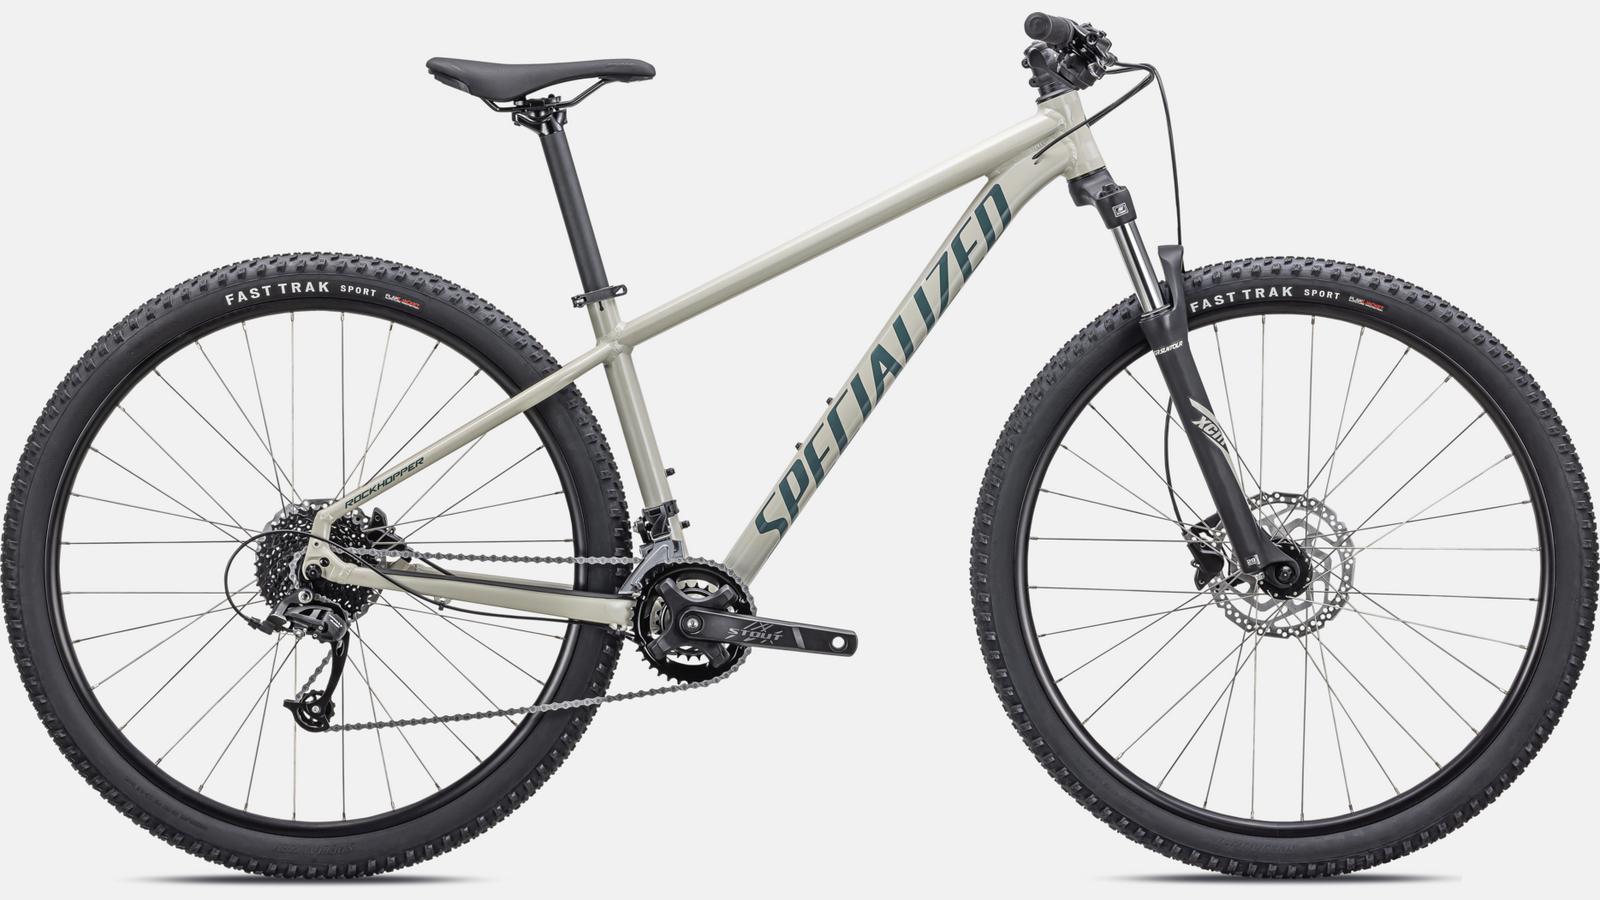 Paint for 2022 Specialized Rockhopper Sport 27.5 - Gloss White Mountains